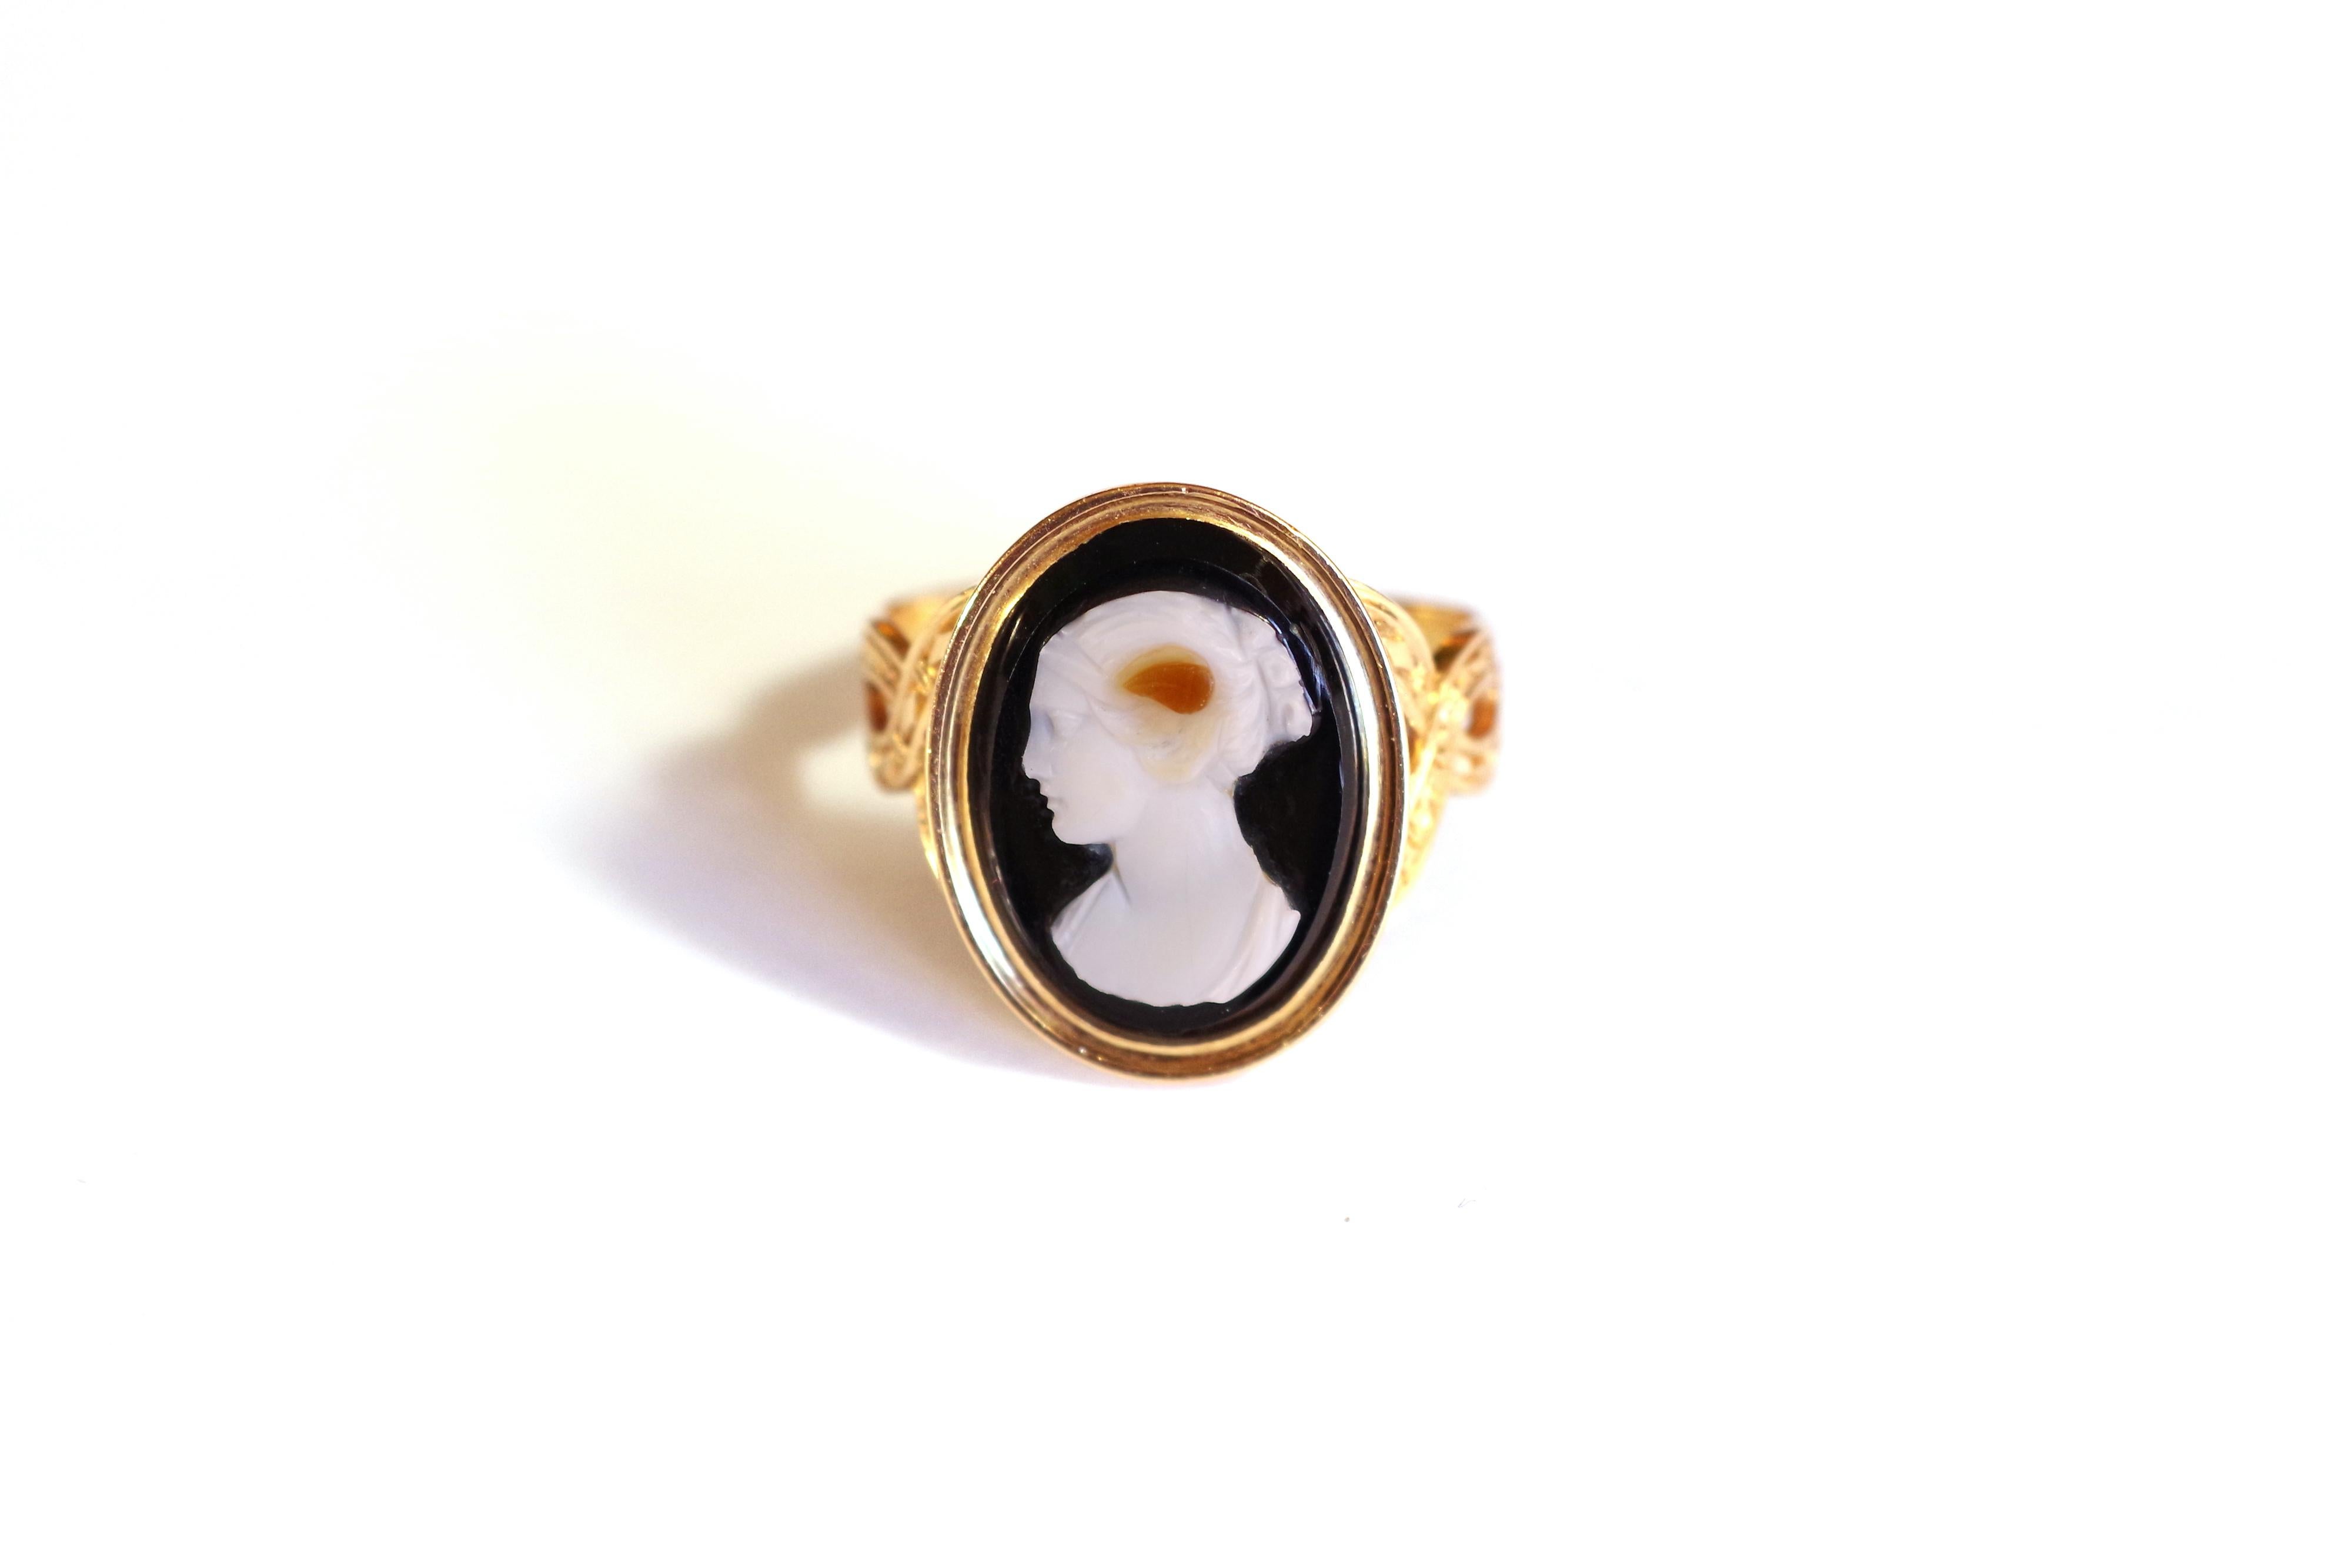 Victorian agate cameo ring in 18 karat pink gold. In the center, a black and white multilayer agate carved in relief depicting Flora goddess in profile. The central stone in bezel setting. Two intertwined strands form the ring, one decorated with